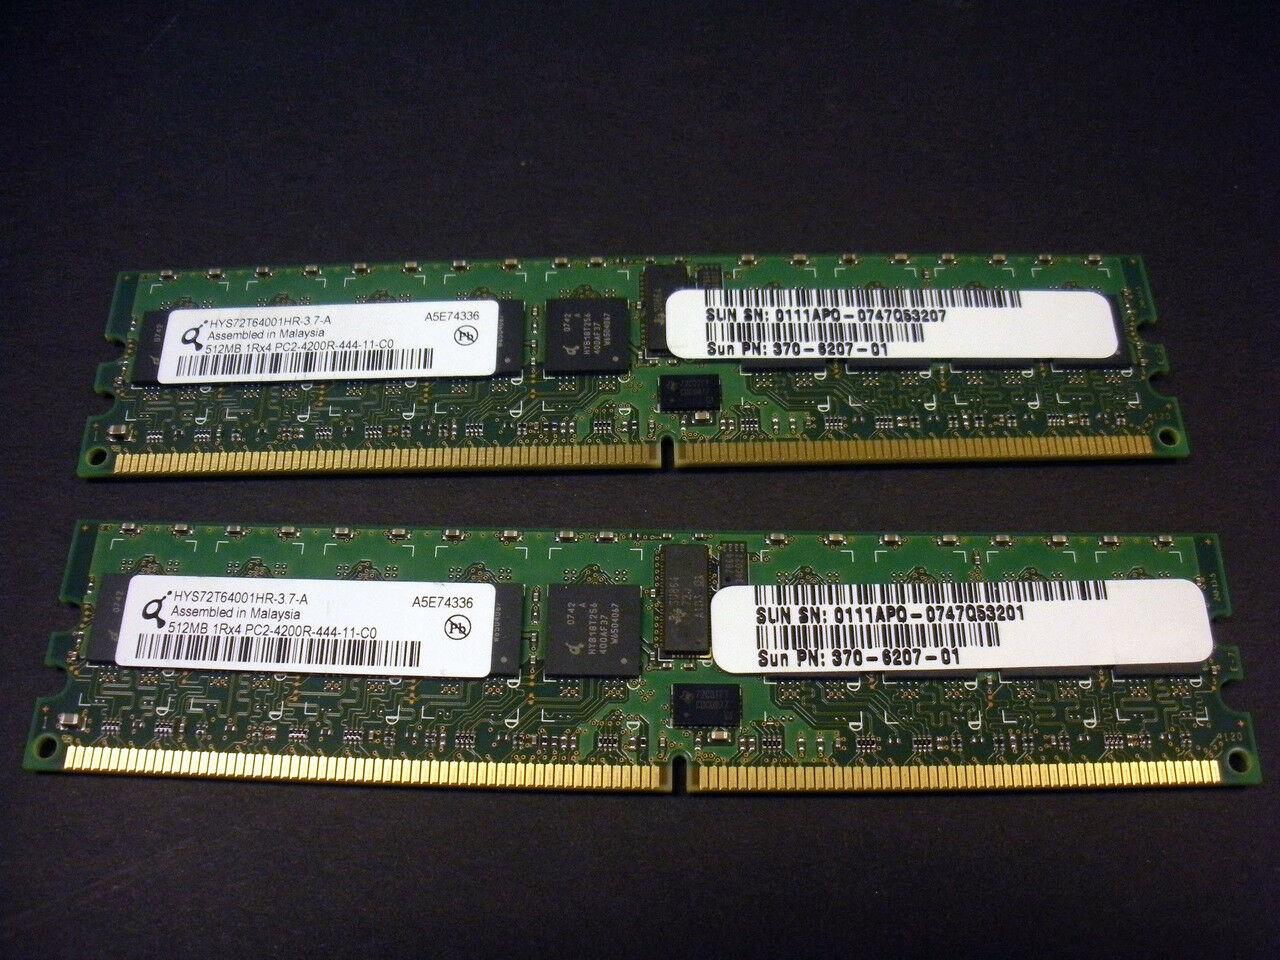 Sun X7800A 1GB (2x 512MB) Memory Kit for  370-6207